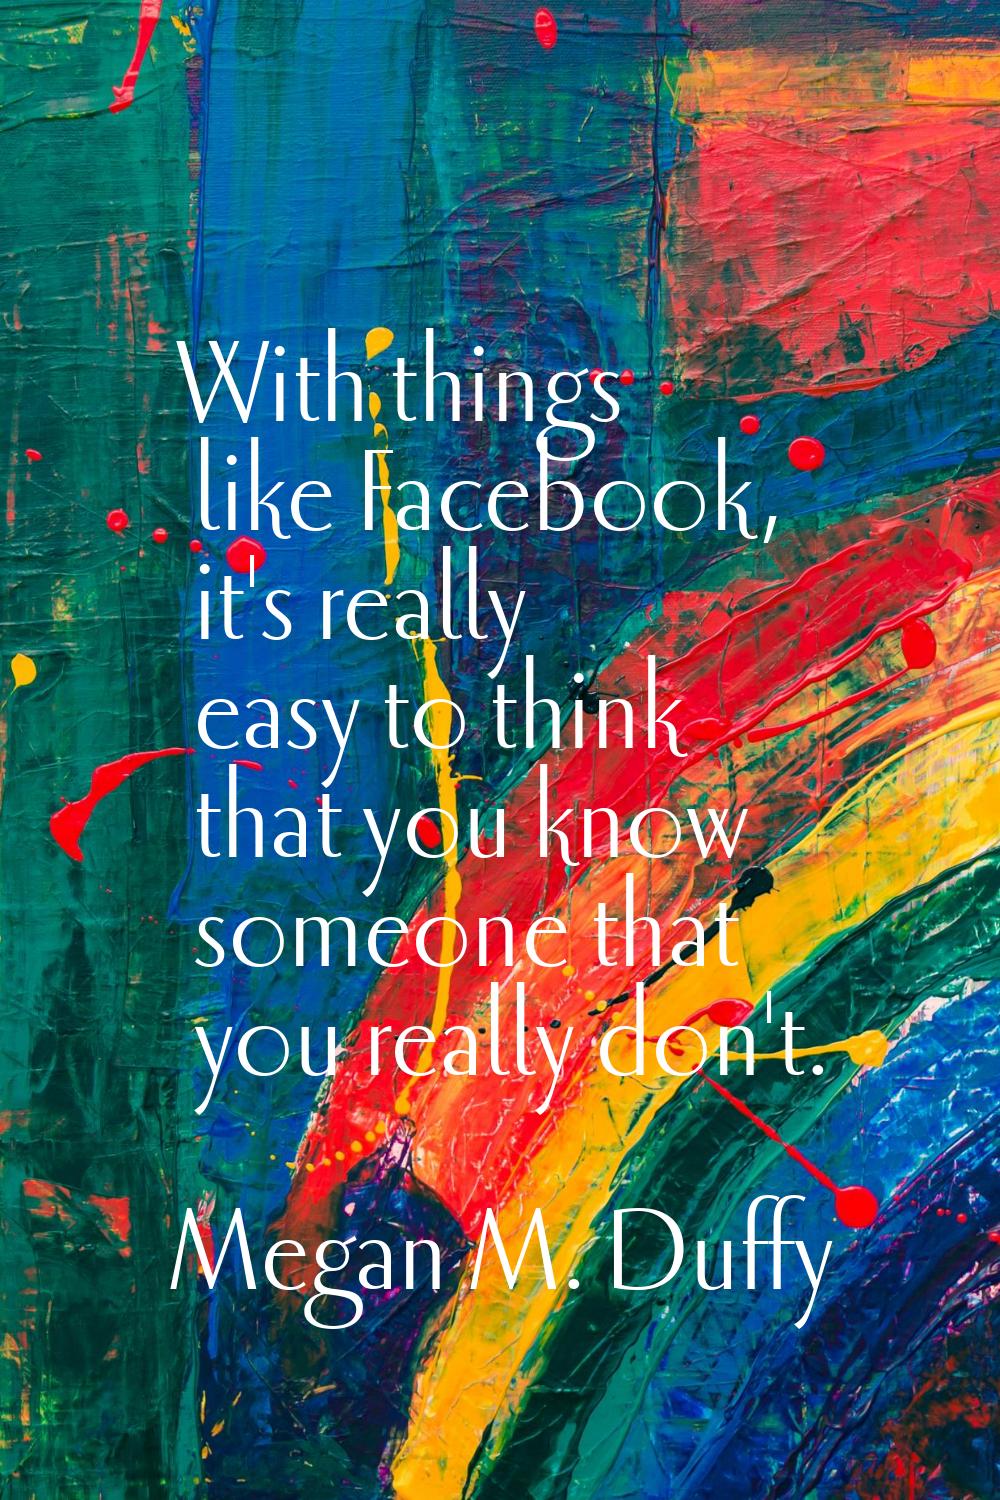 With things like Facebook, it's really easy to think that you know someone that you really don't.